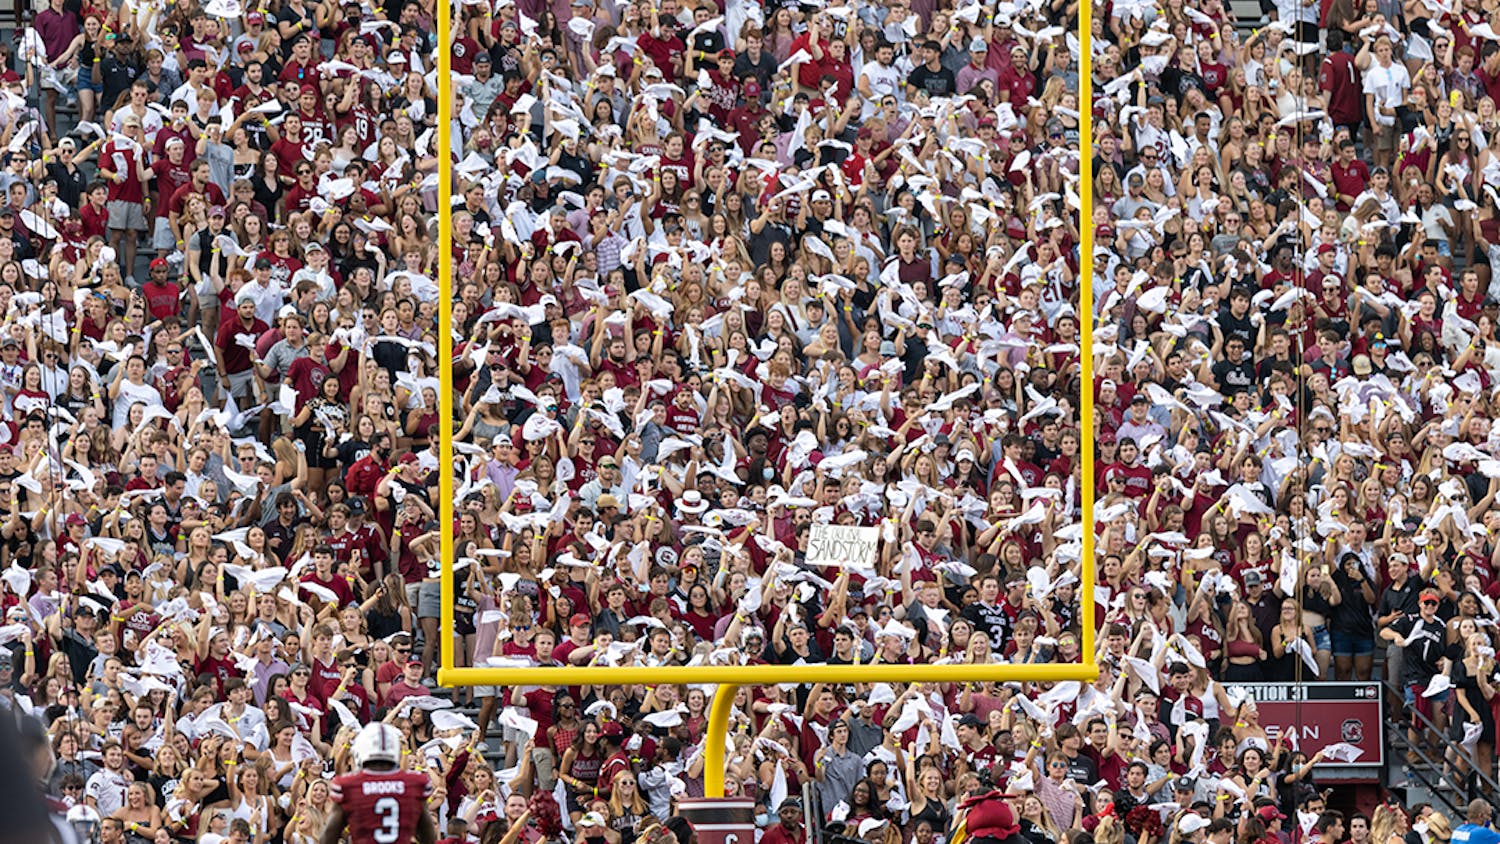 The Sandstorm begins in the student section as rally towels are flailed around. The celebration occurred after a great play during the Gamecocks vs. Eastern Illinois on Sept. 4, 2021.